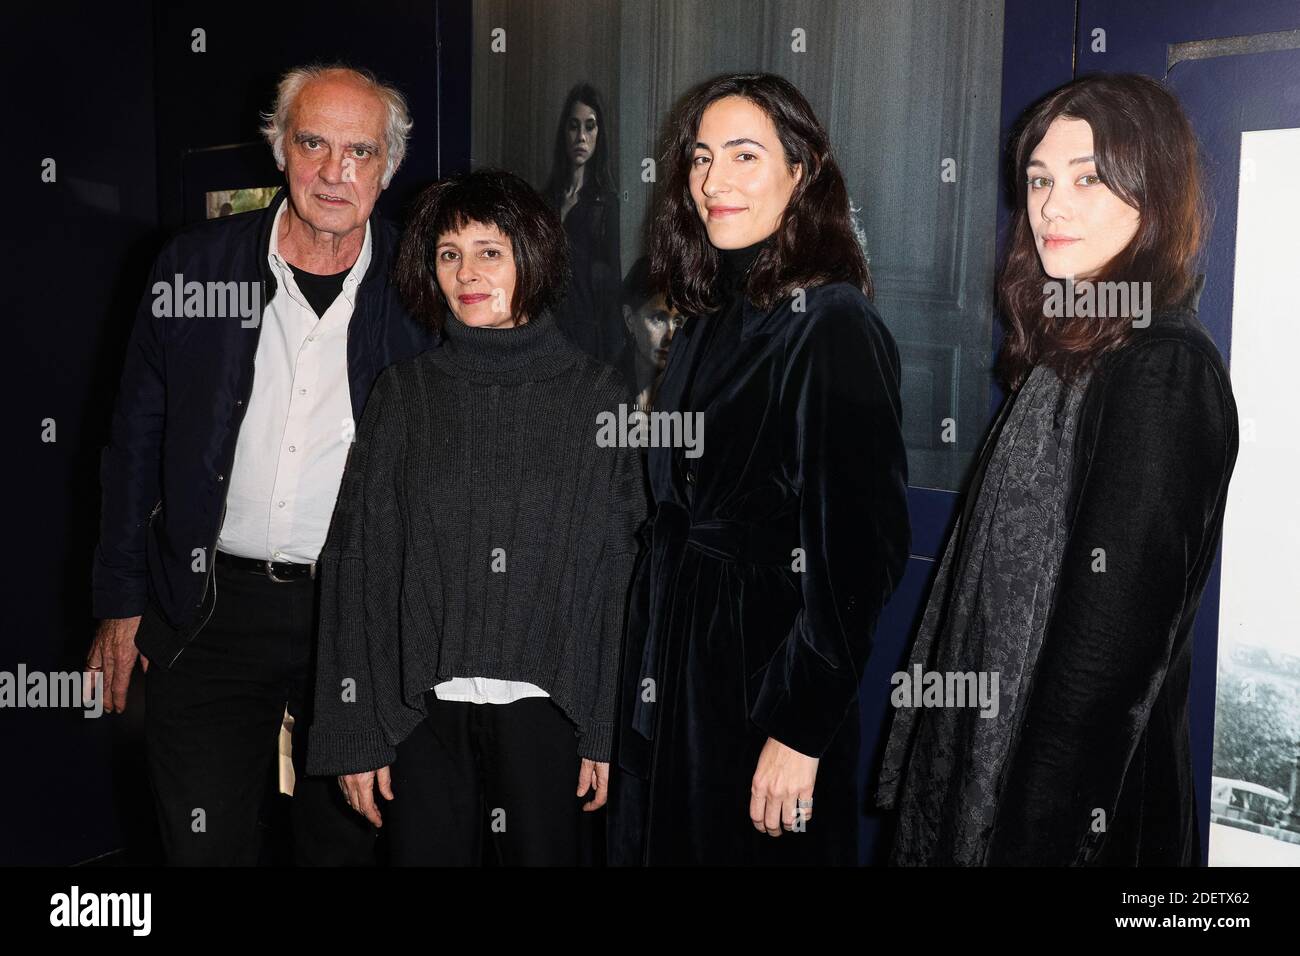 Jean-Louis Martinelli, Anouk Grinberg, Director Charlotte Dauphin, Astrid  Berges-Frisbey attending the premiere of the film L'Autre held at Beau  Regard Cinema in Paris, France on December 16, 2019. Photo by David  Boyer/ABACAPRESS.COM